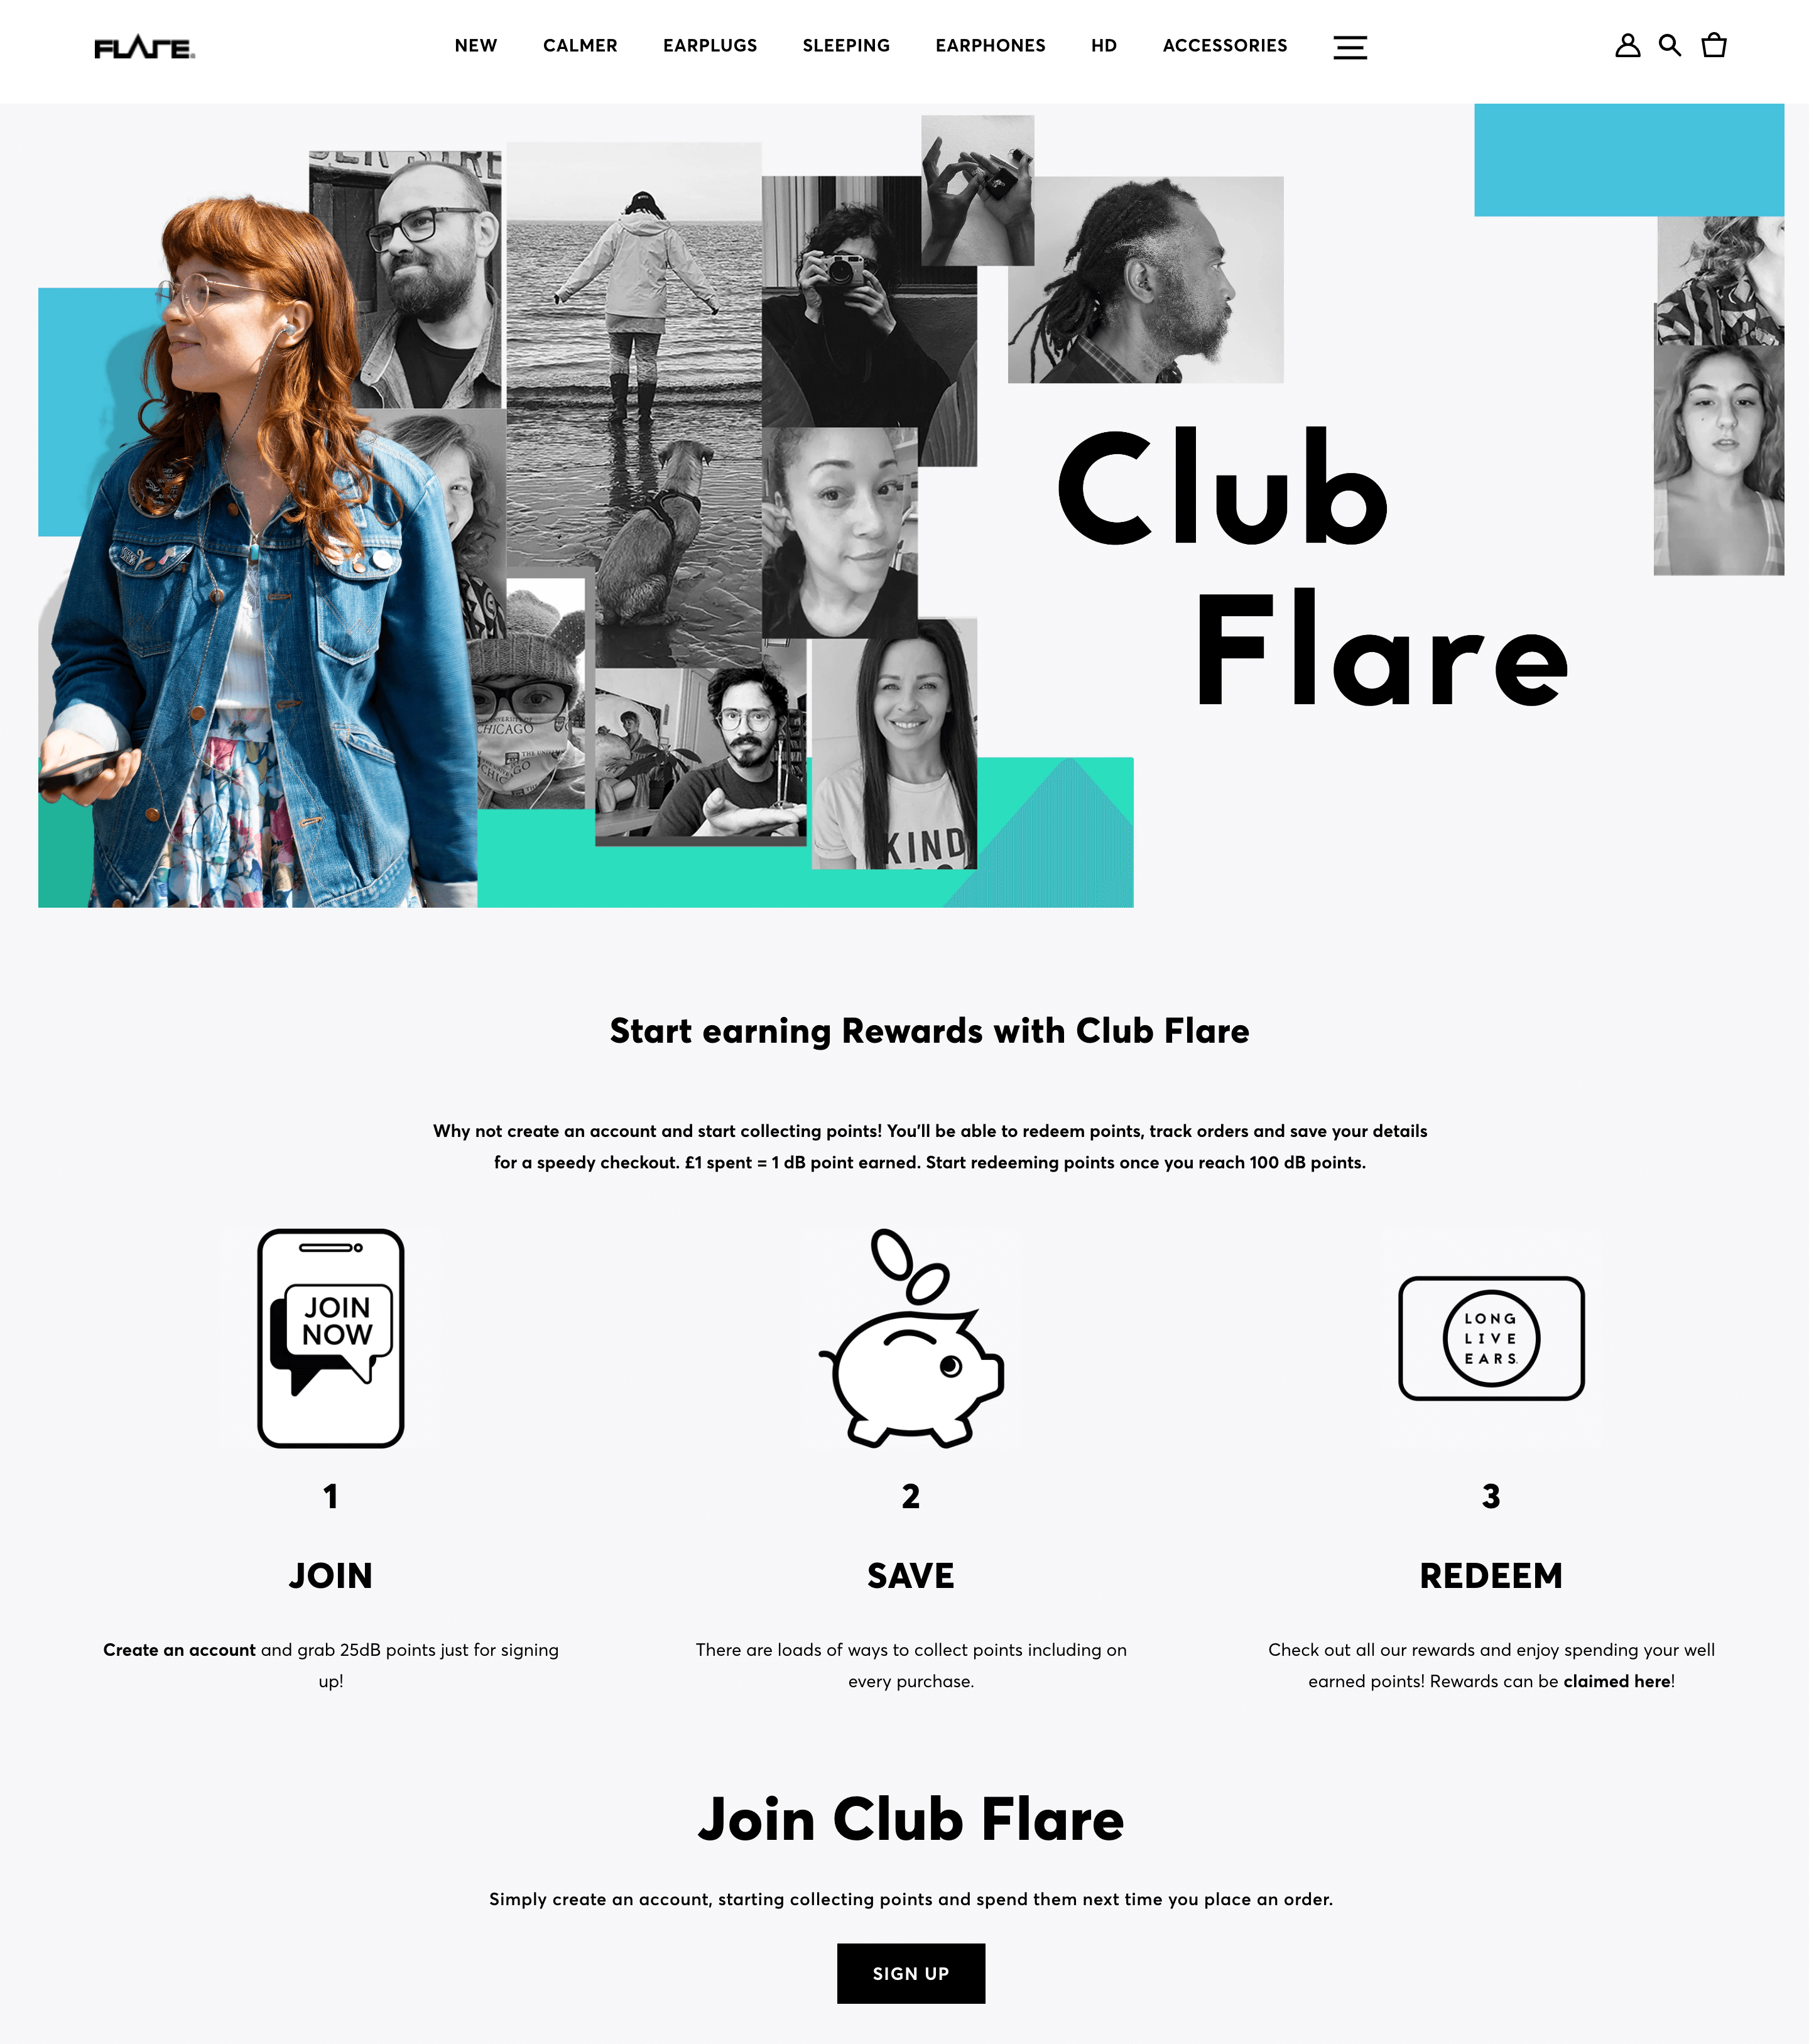 A screenshot from Flare Audio’s rewards program explainer page showing how to start earning rewards with Club Flare.